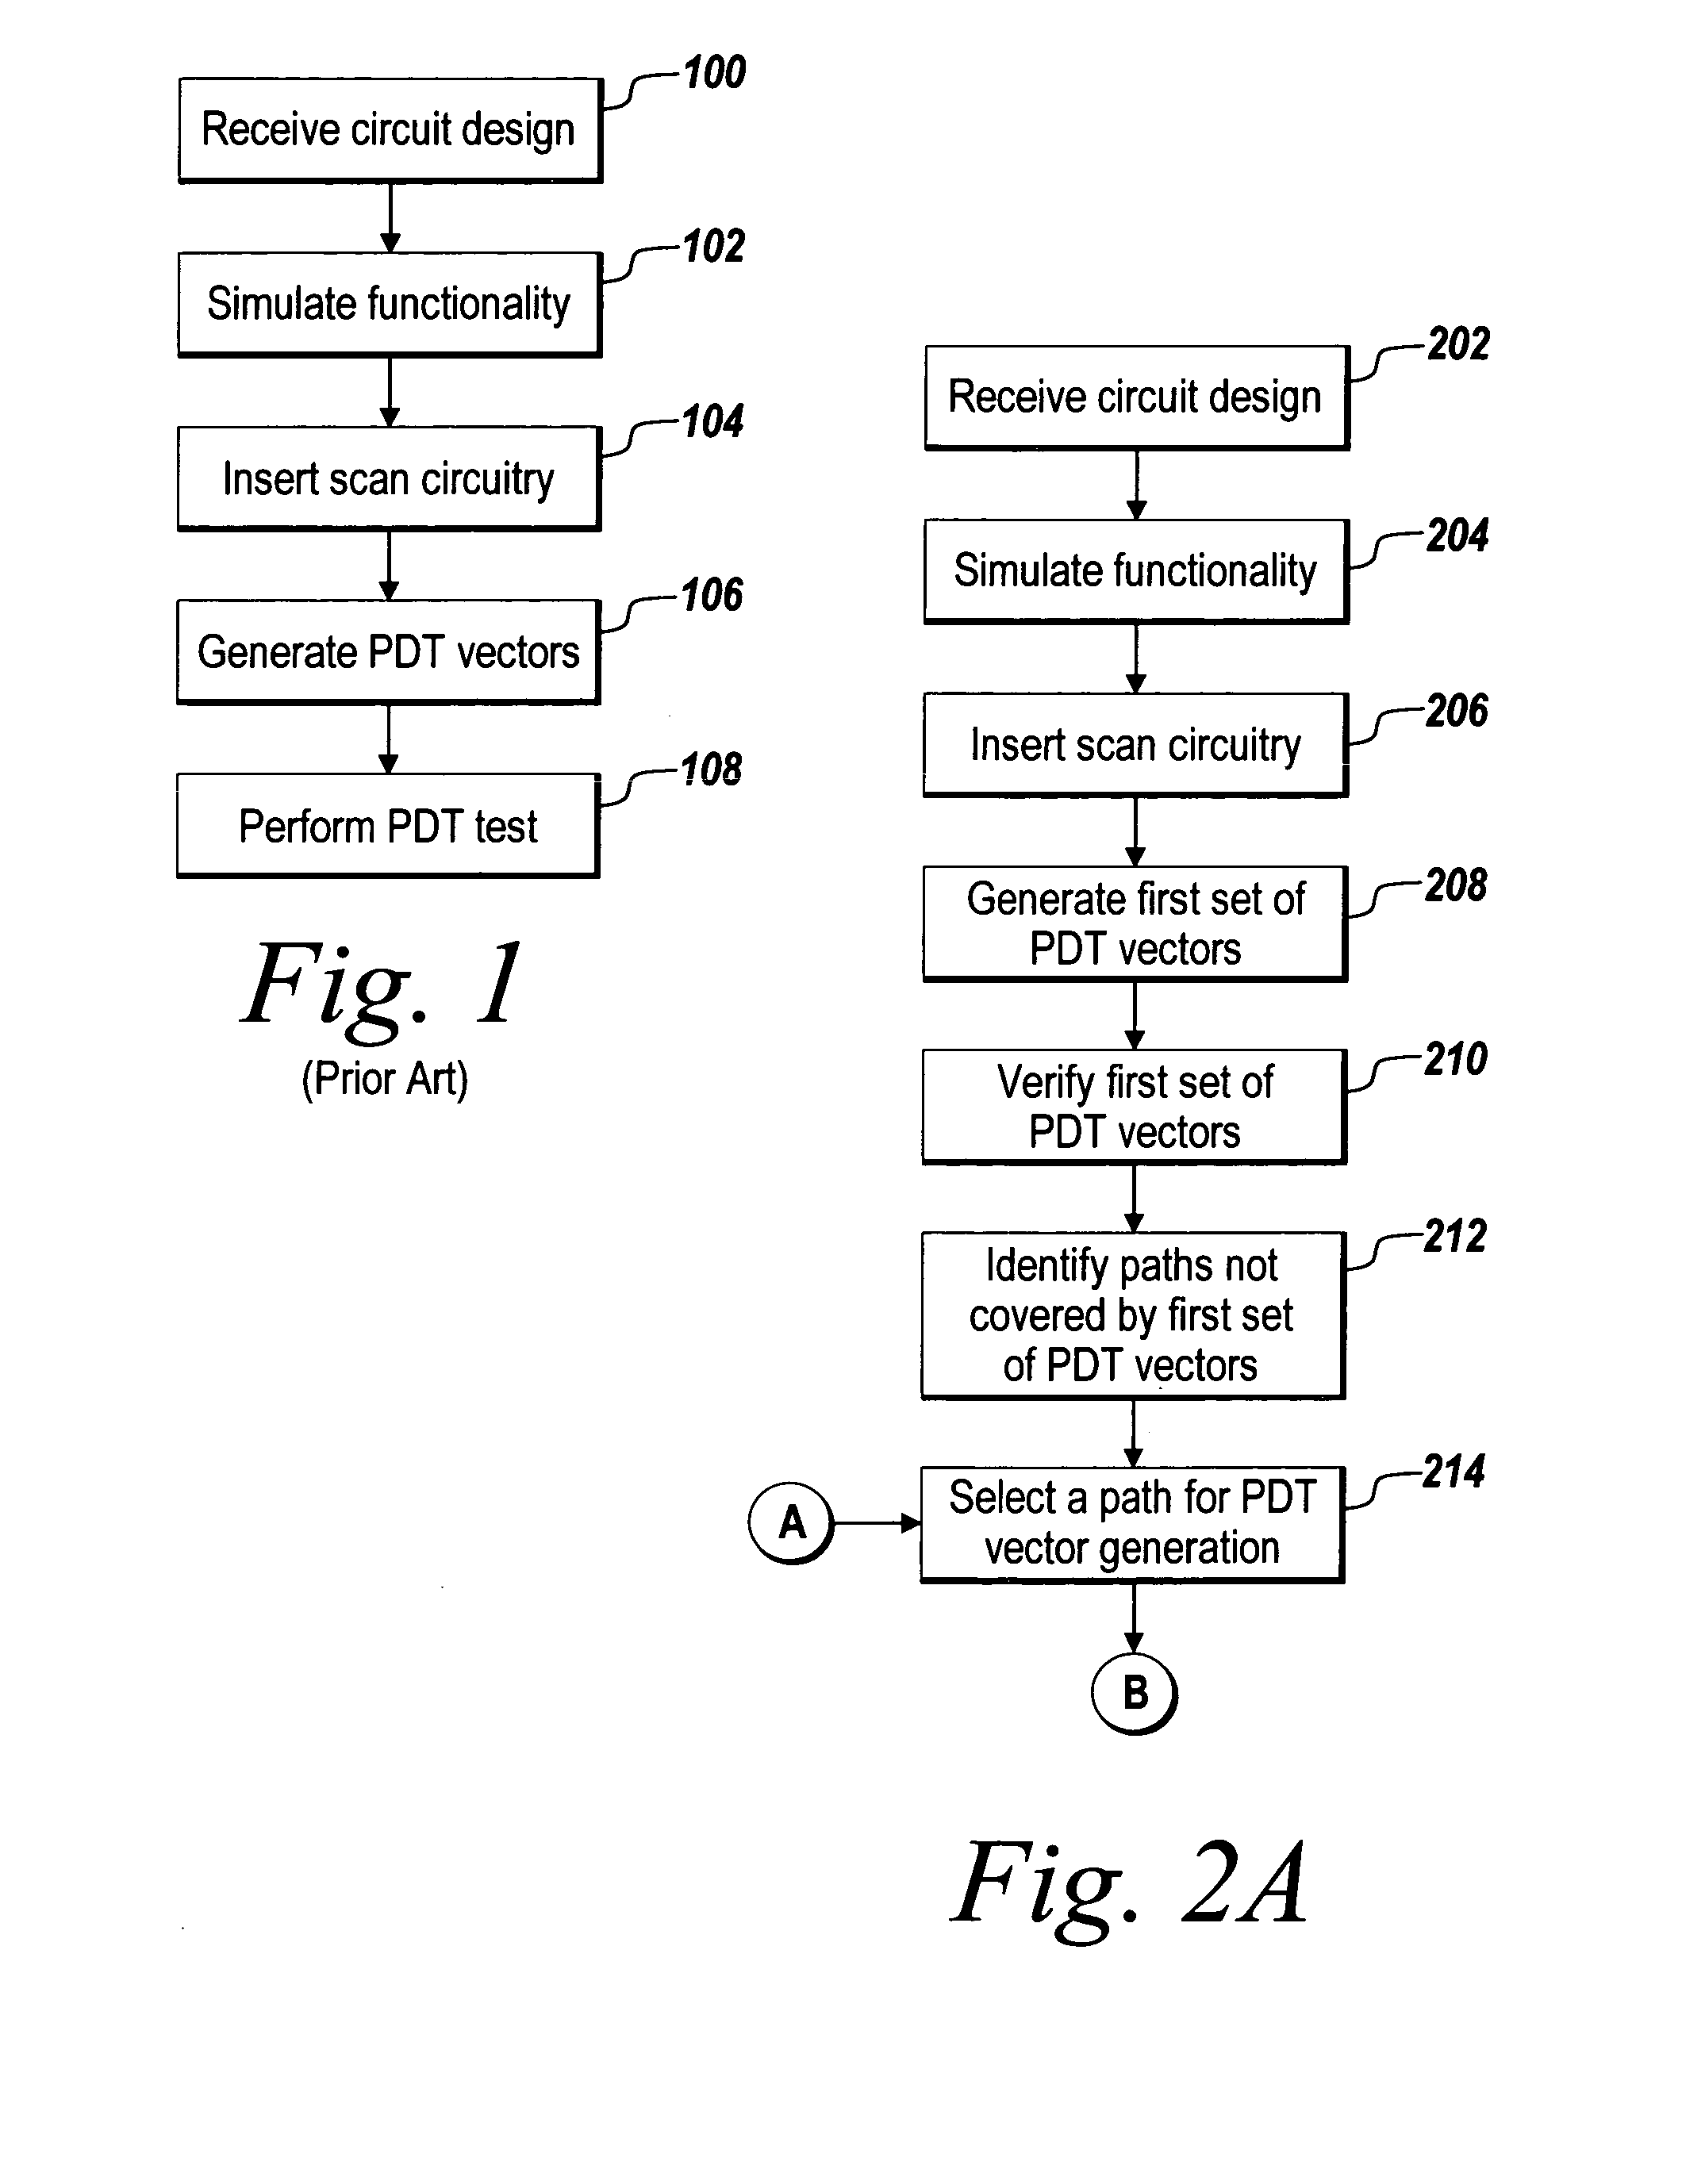 Method and system for automated path delay test vector generation from functional tests